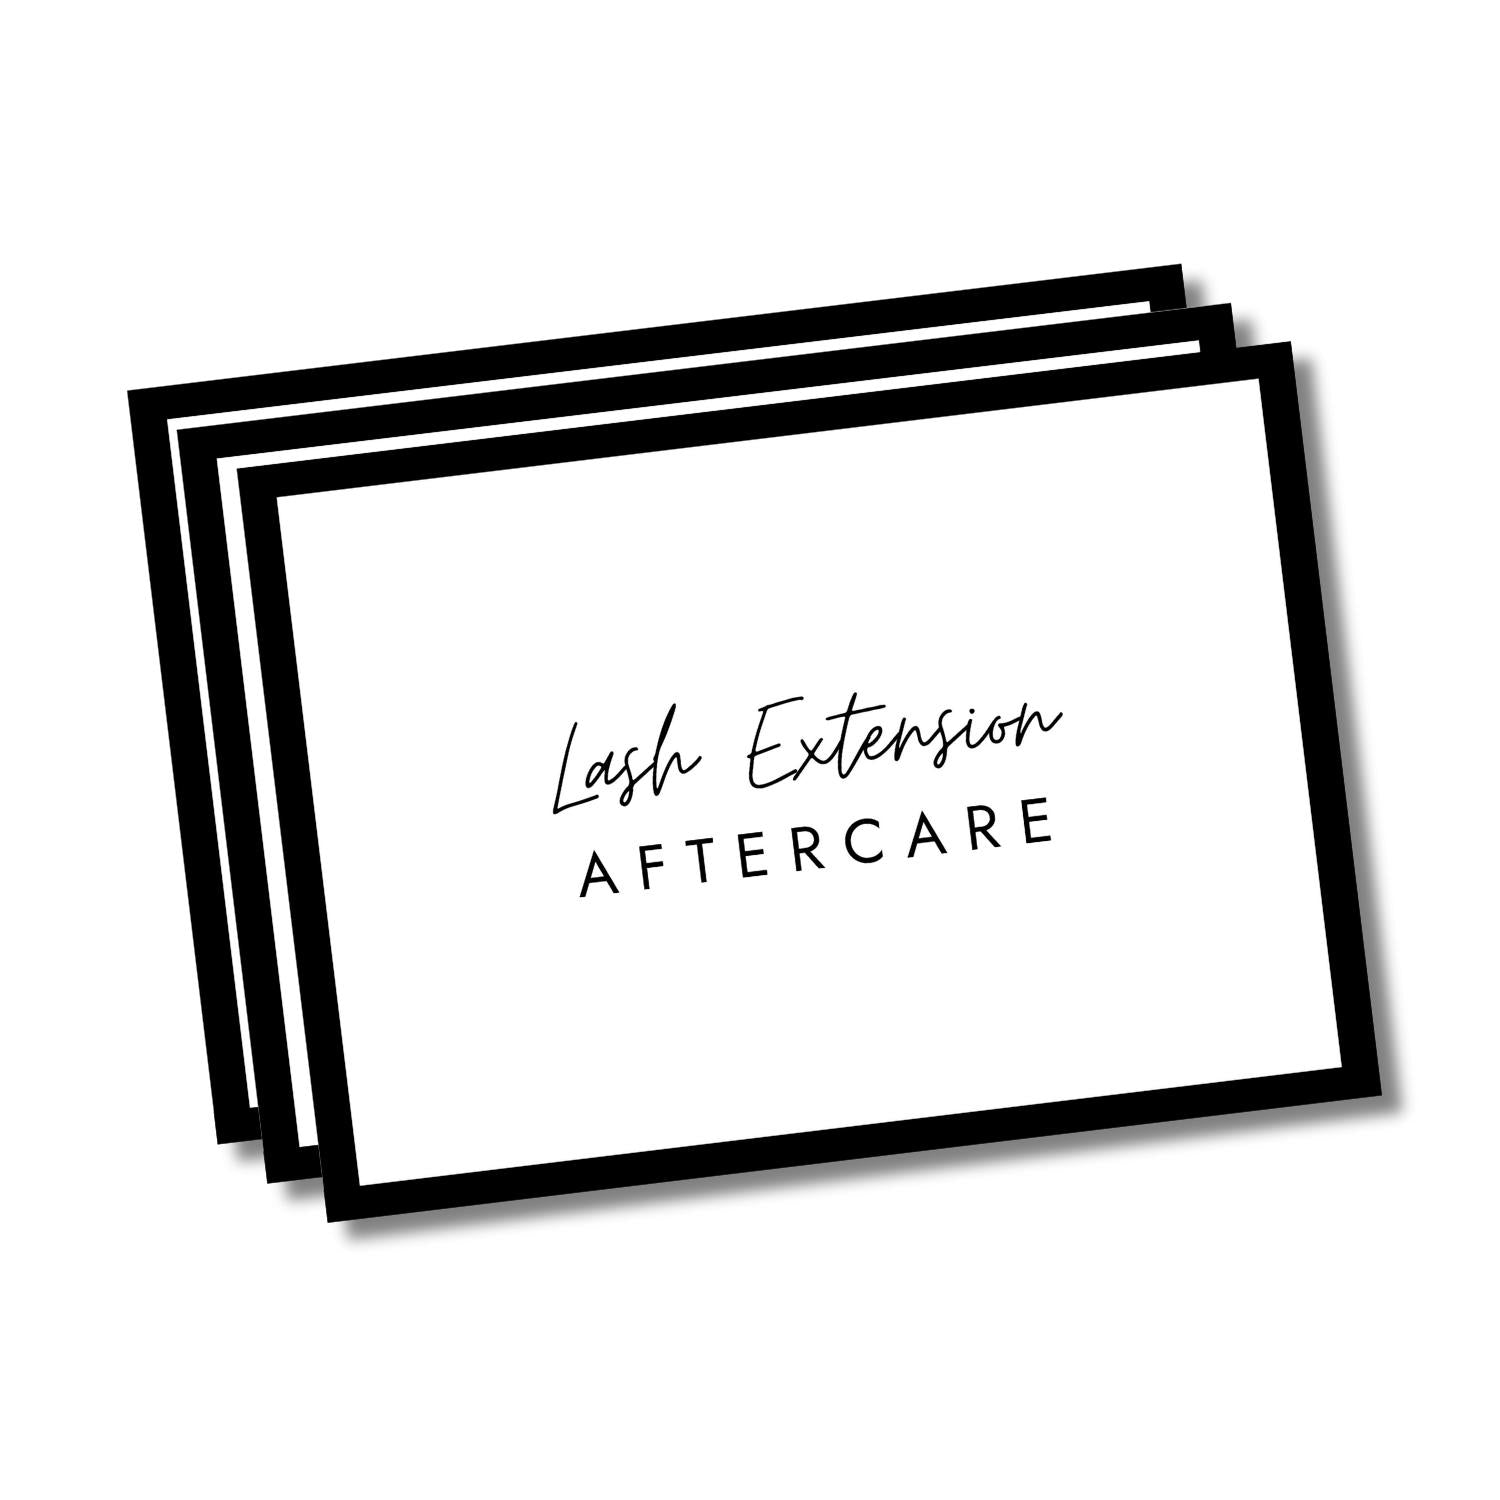 Lash Extension Aftercare Advice Cards